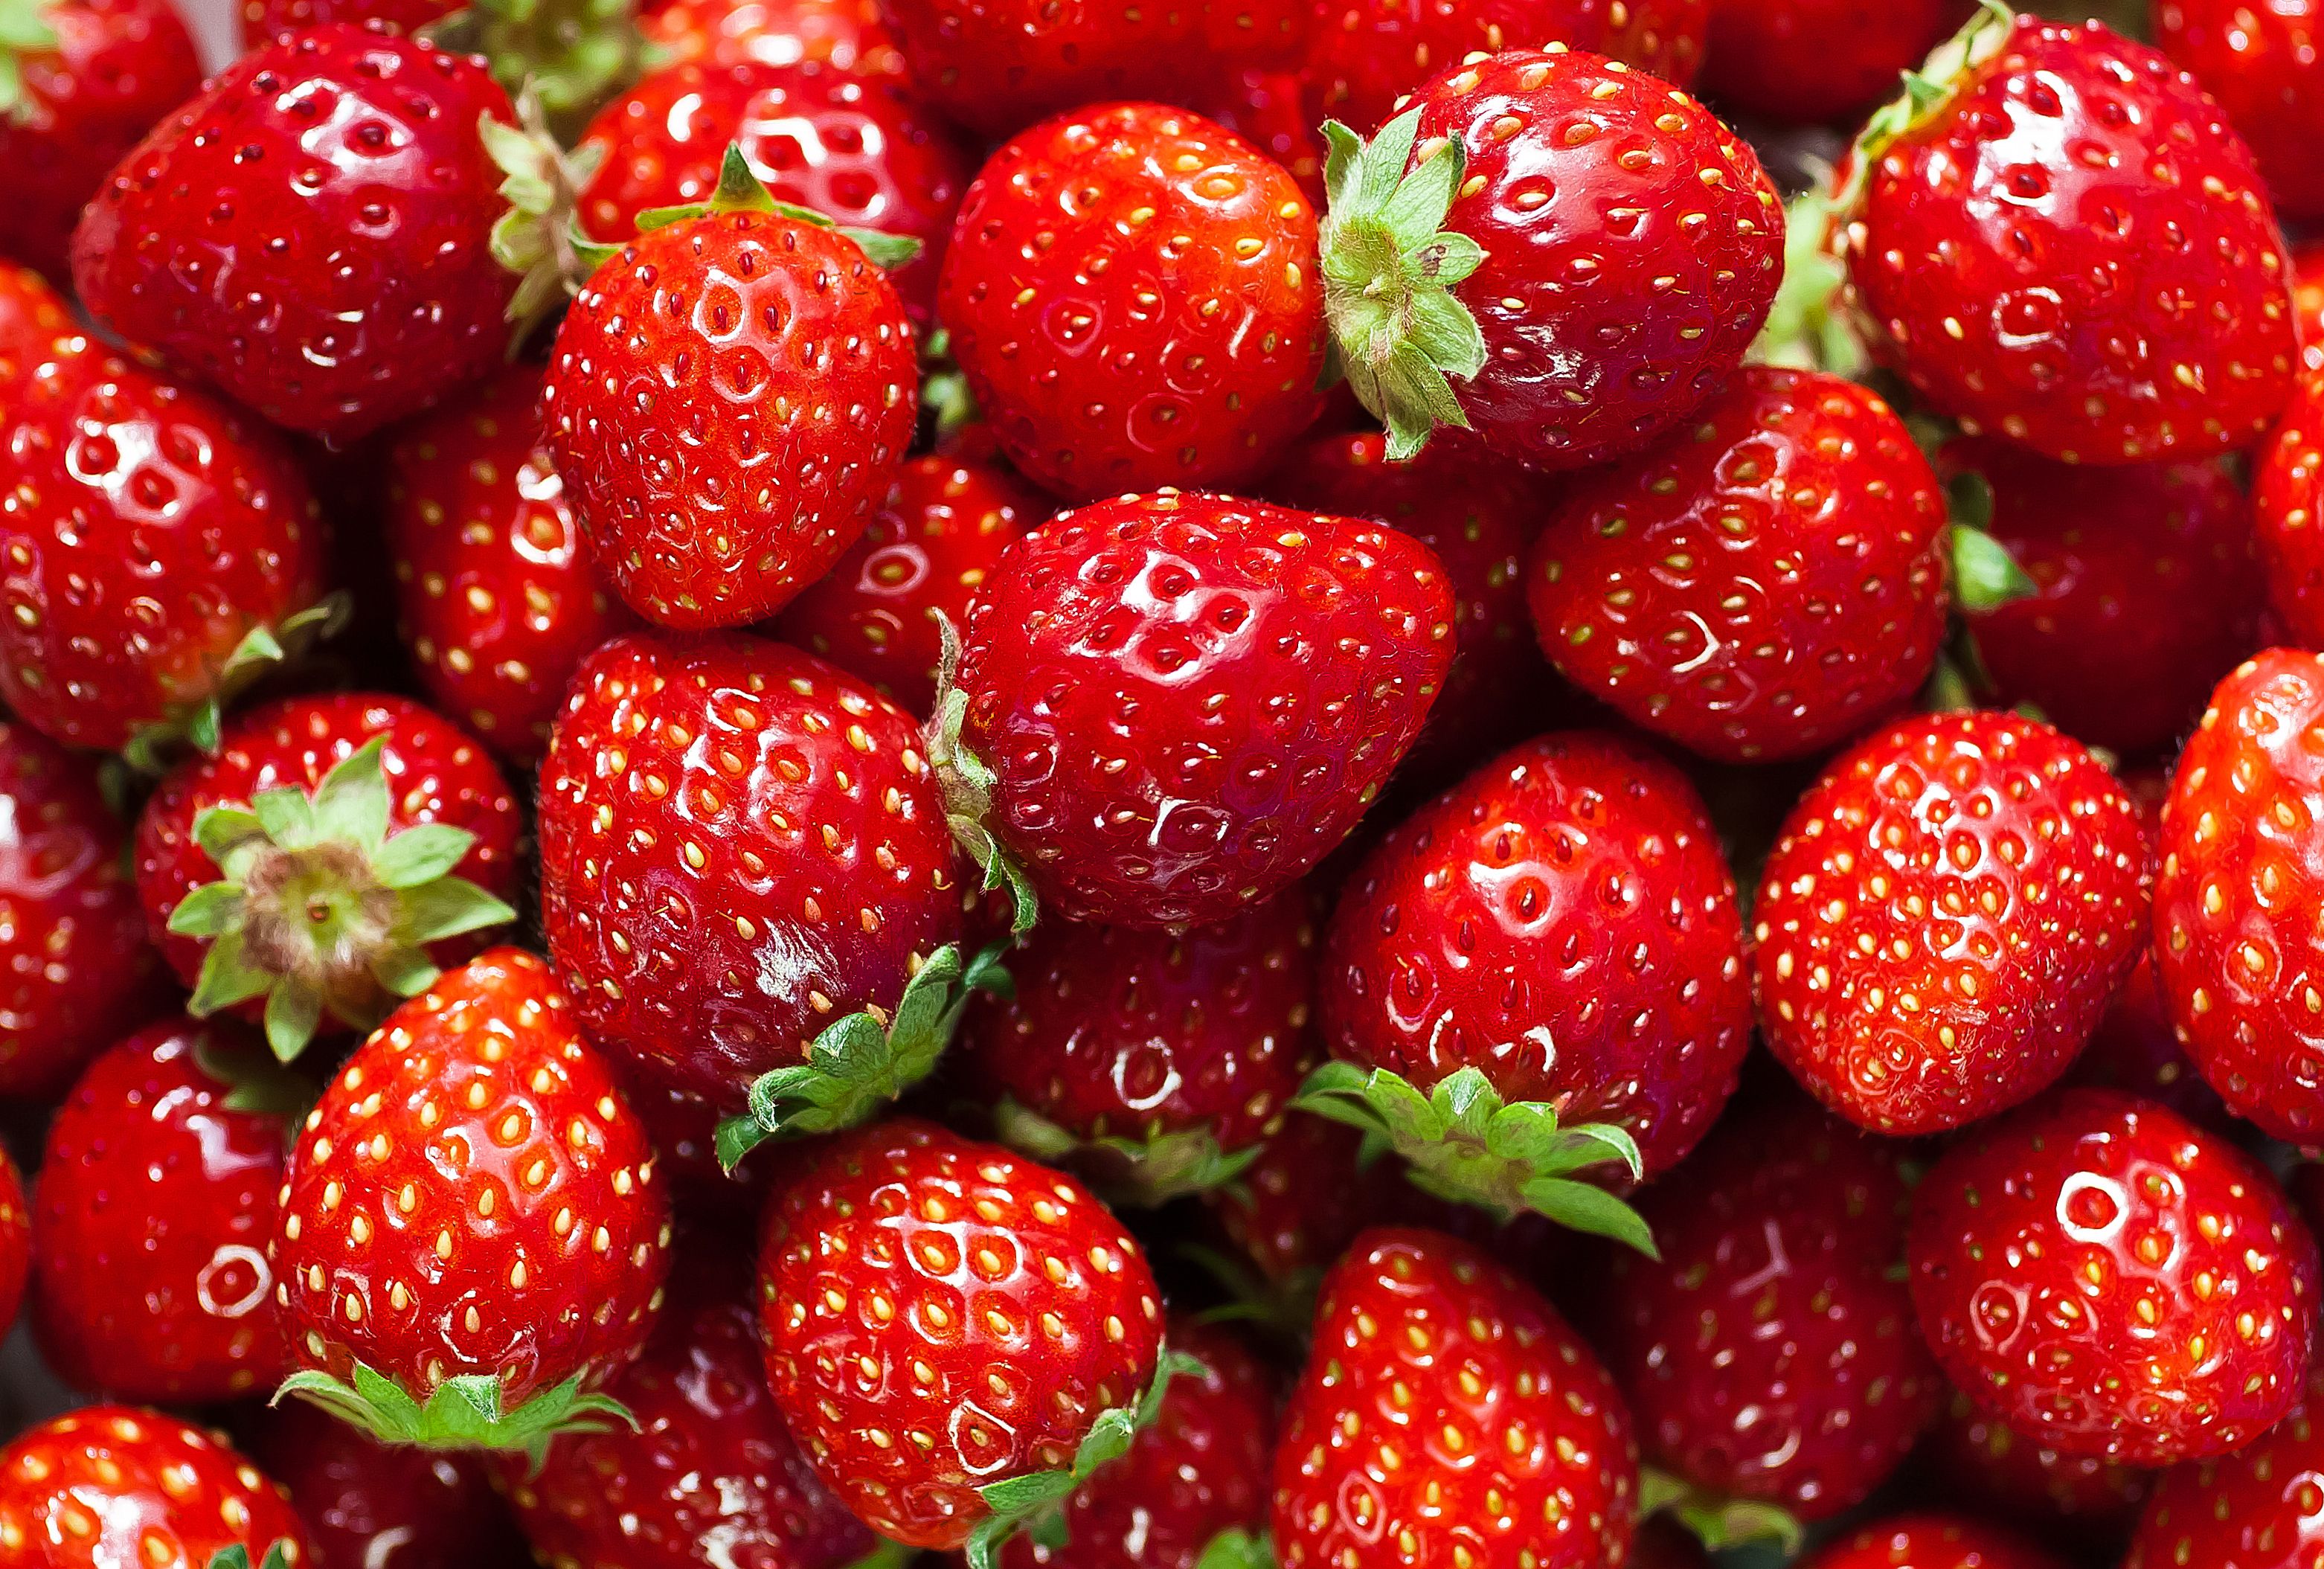 Strawberry Facts - Fun Facts About Strawberries